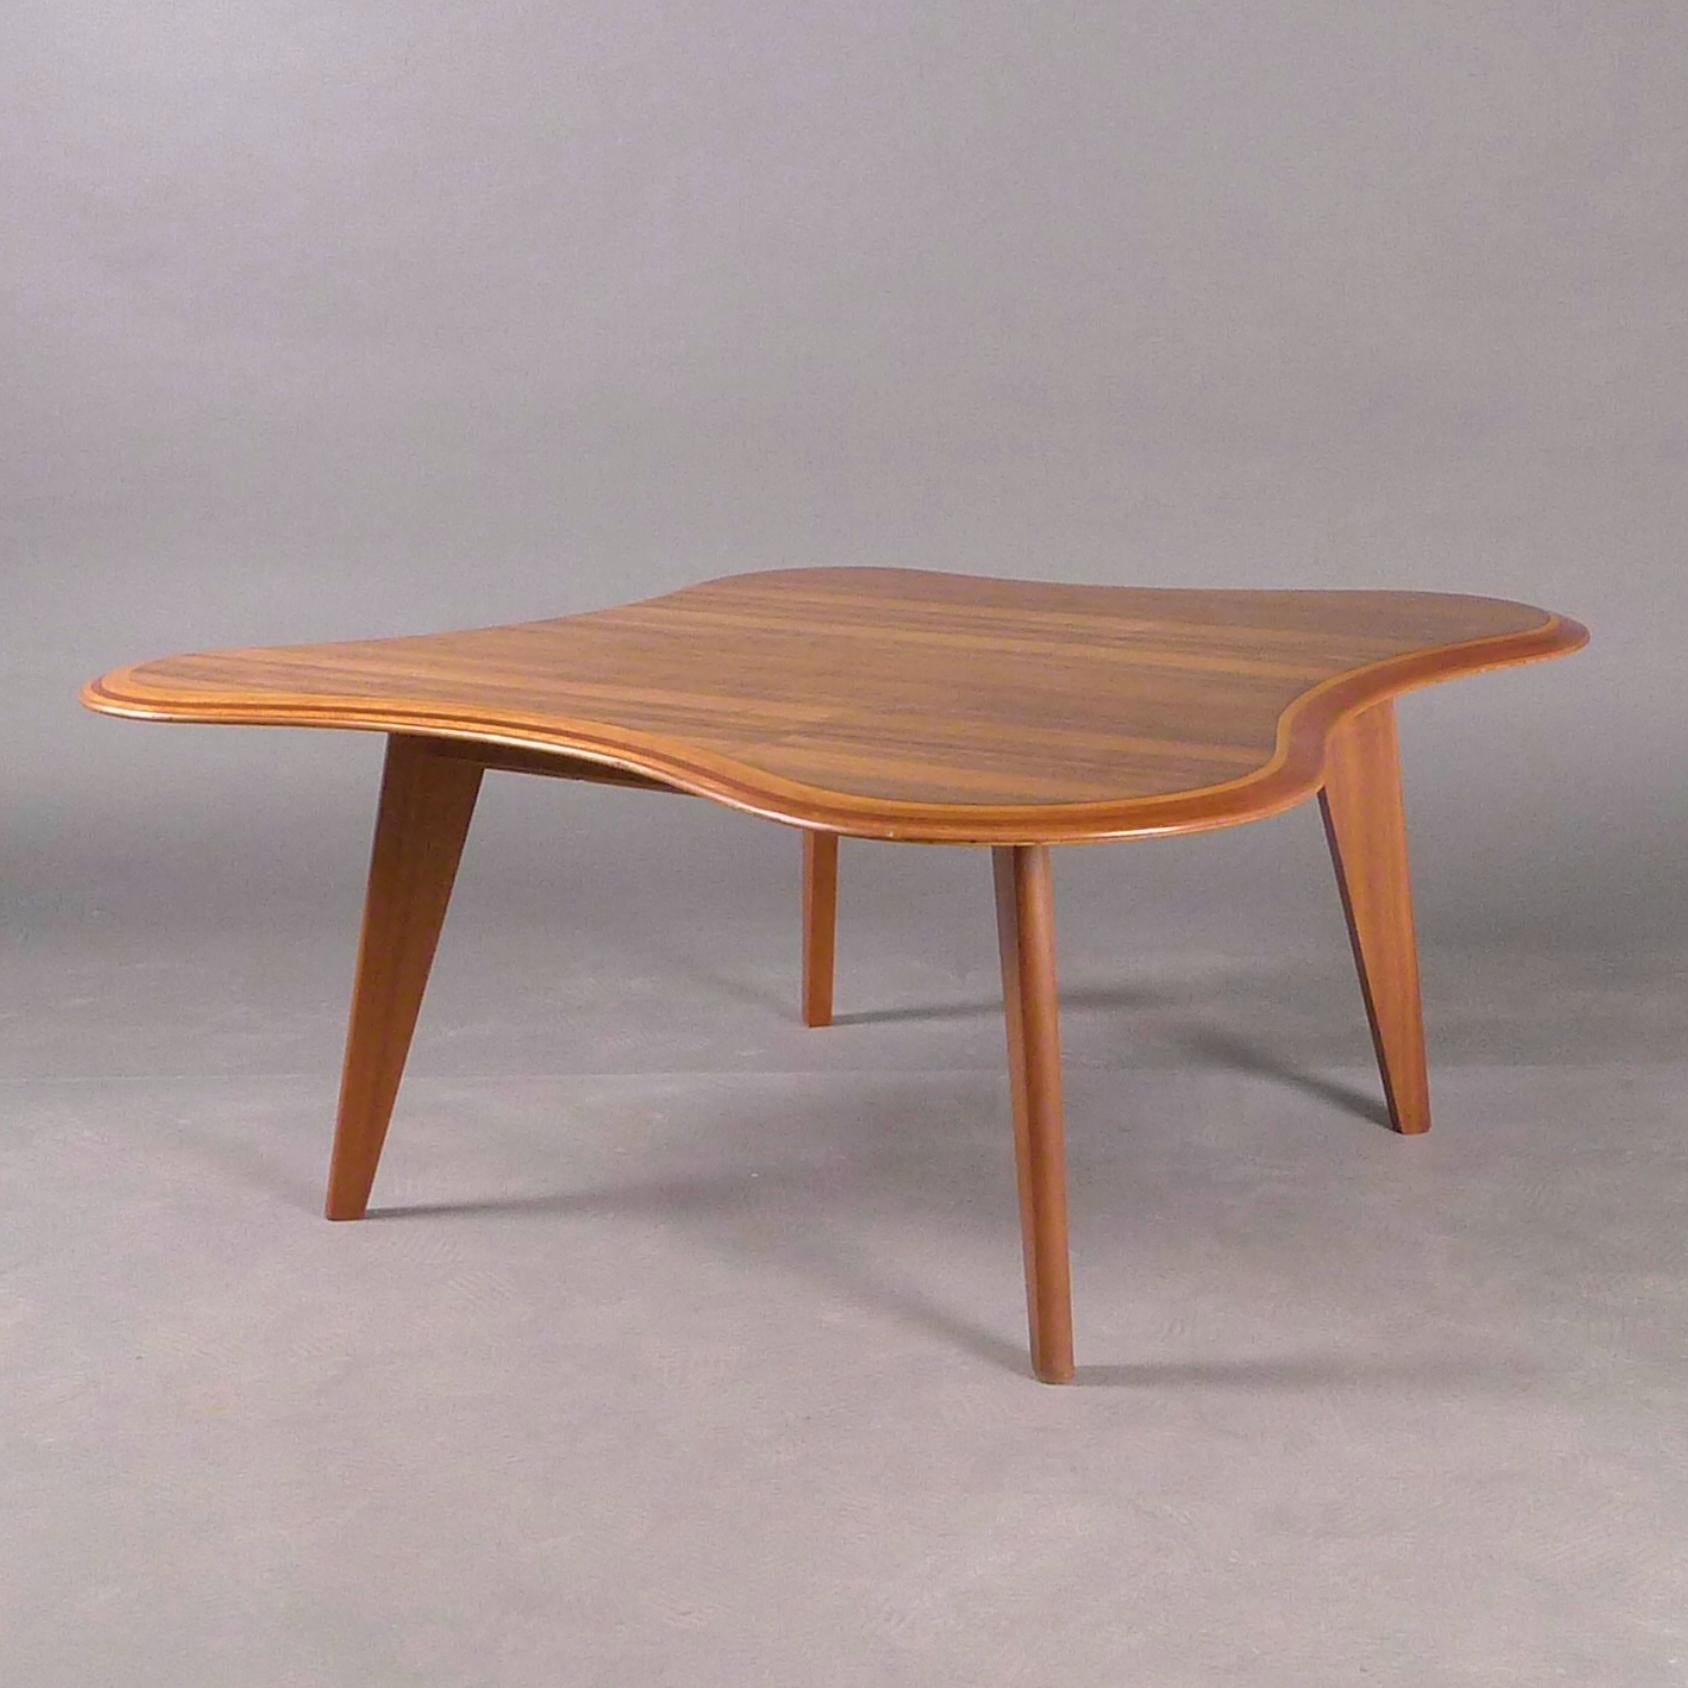 Neil Morris, Cloud Table, for H. Morris & Co, Glasgow, designed 1947 In Good Condition For Sale In Wargrave, Berkshire